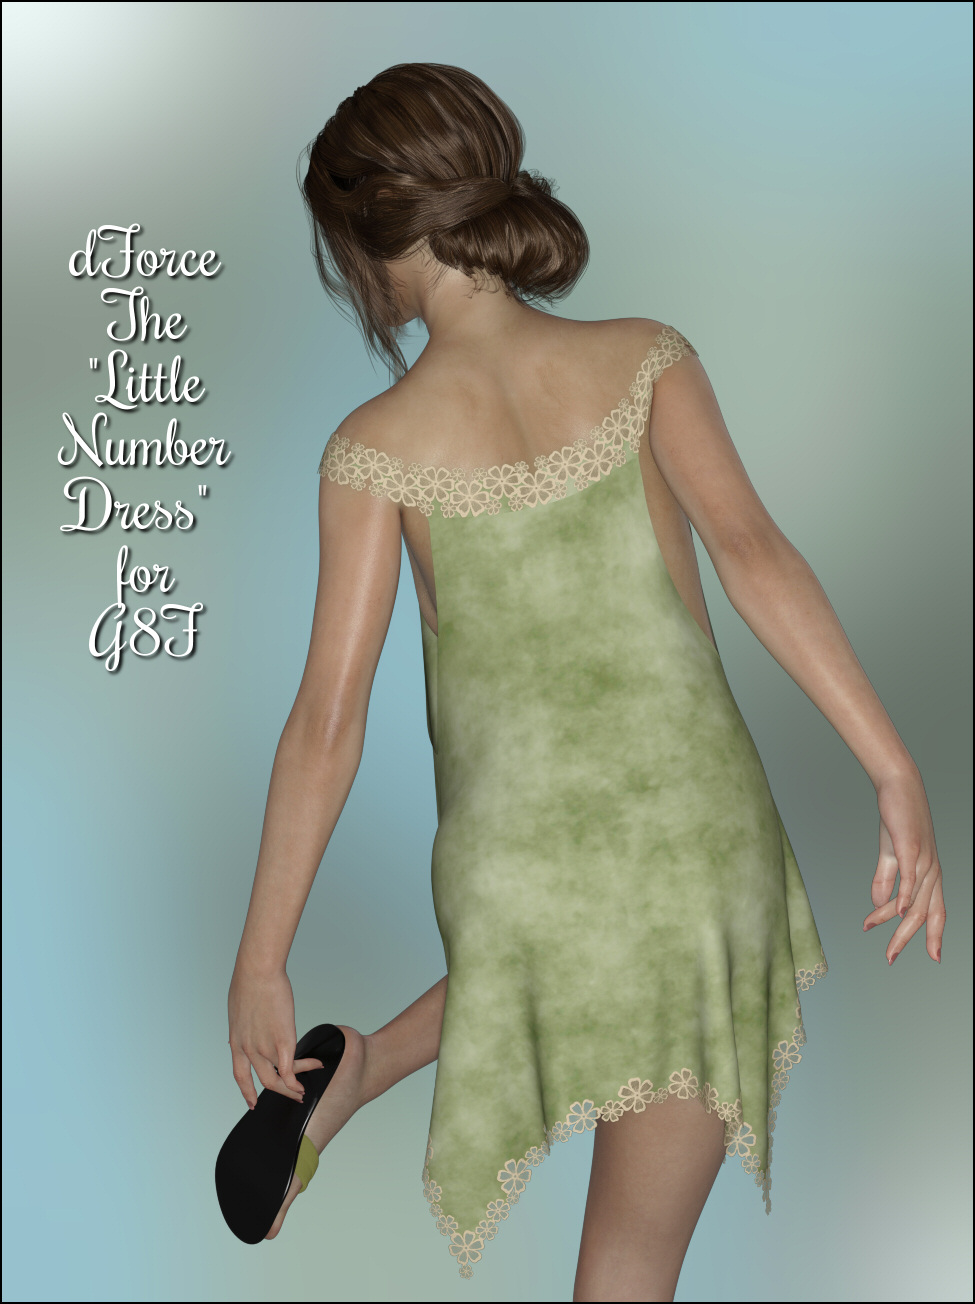 dForce - The Little Number Dress for G8F by: Lully, 3D Models by Daz 3D